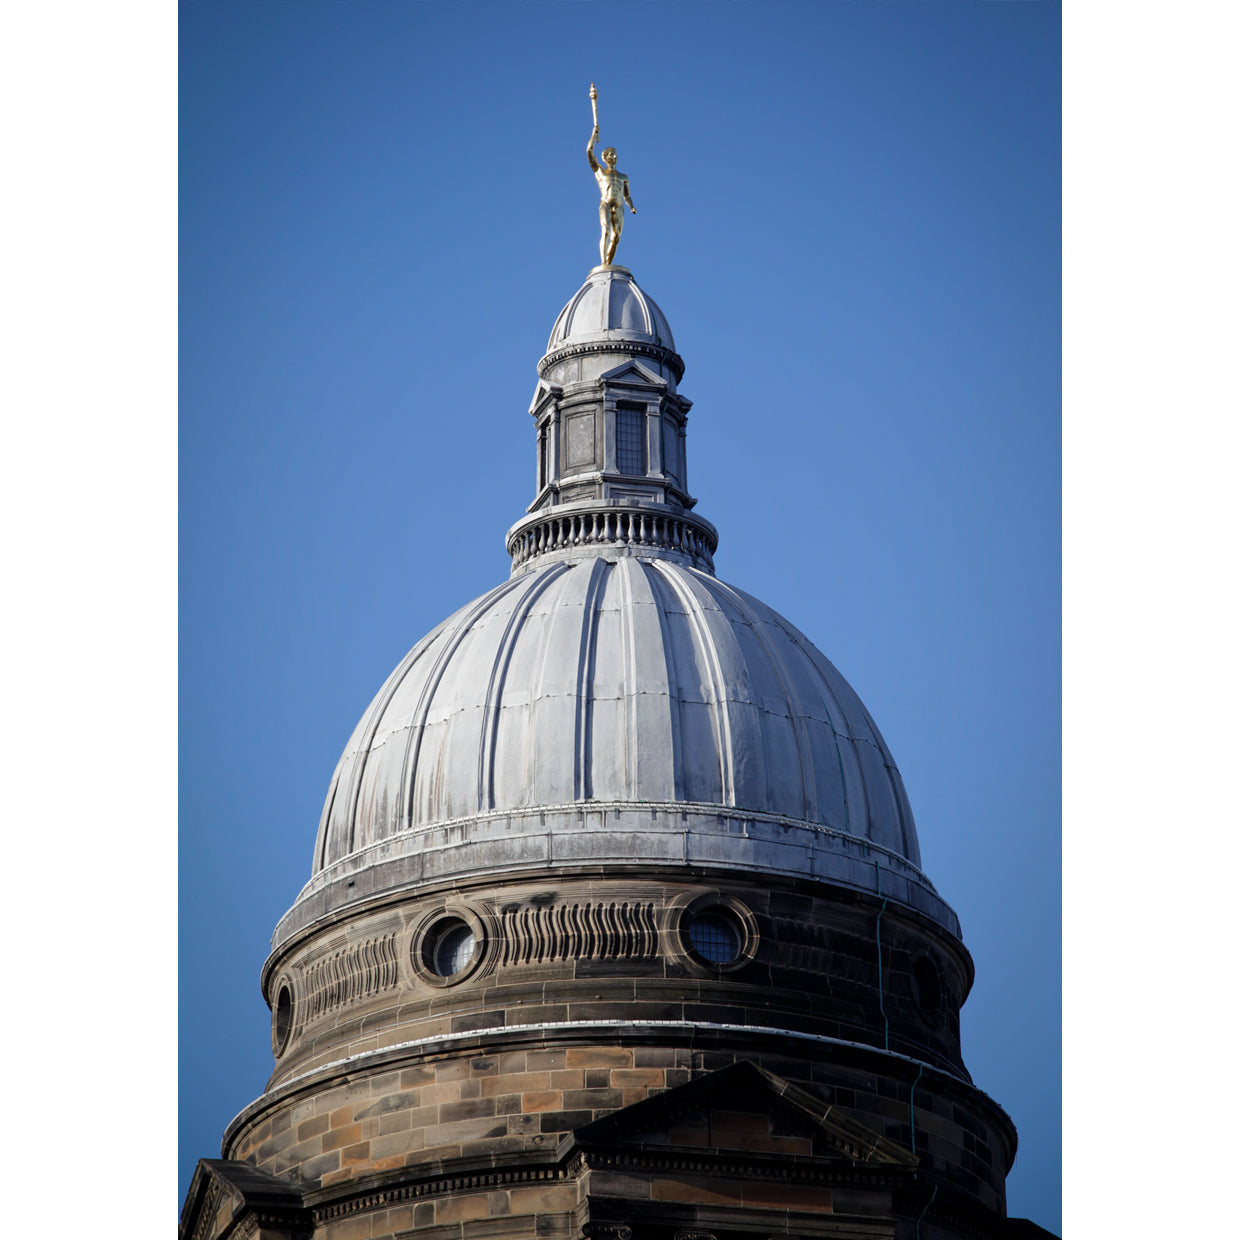 Photograph of Golden boy on top of old college dome